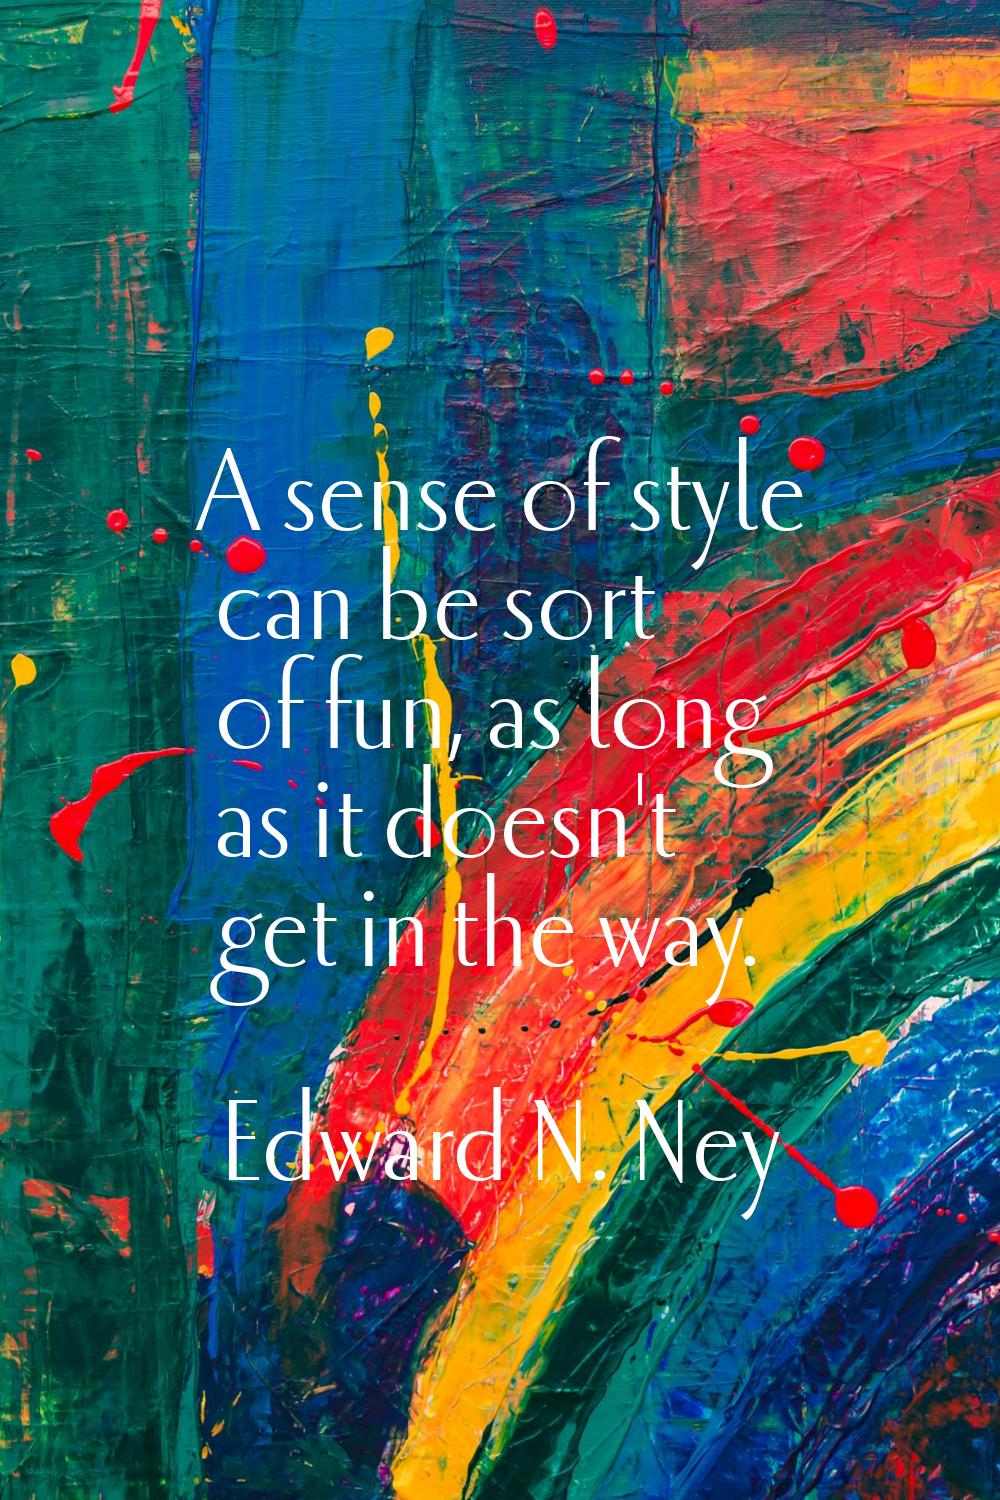 A sense of style can be sort of fun, as long as it doesn't get in the way.